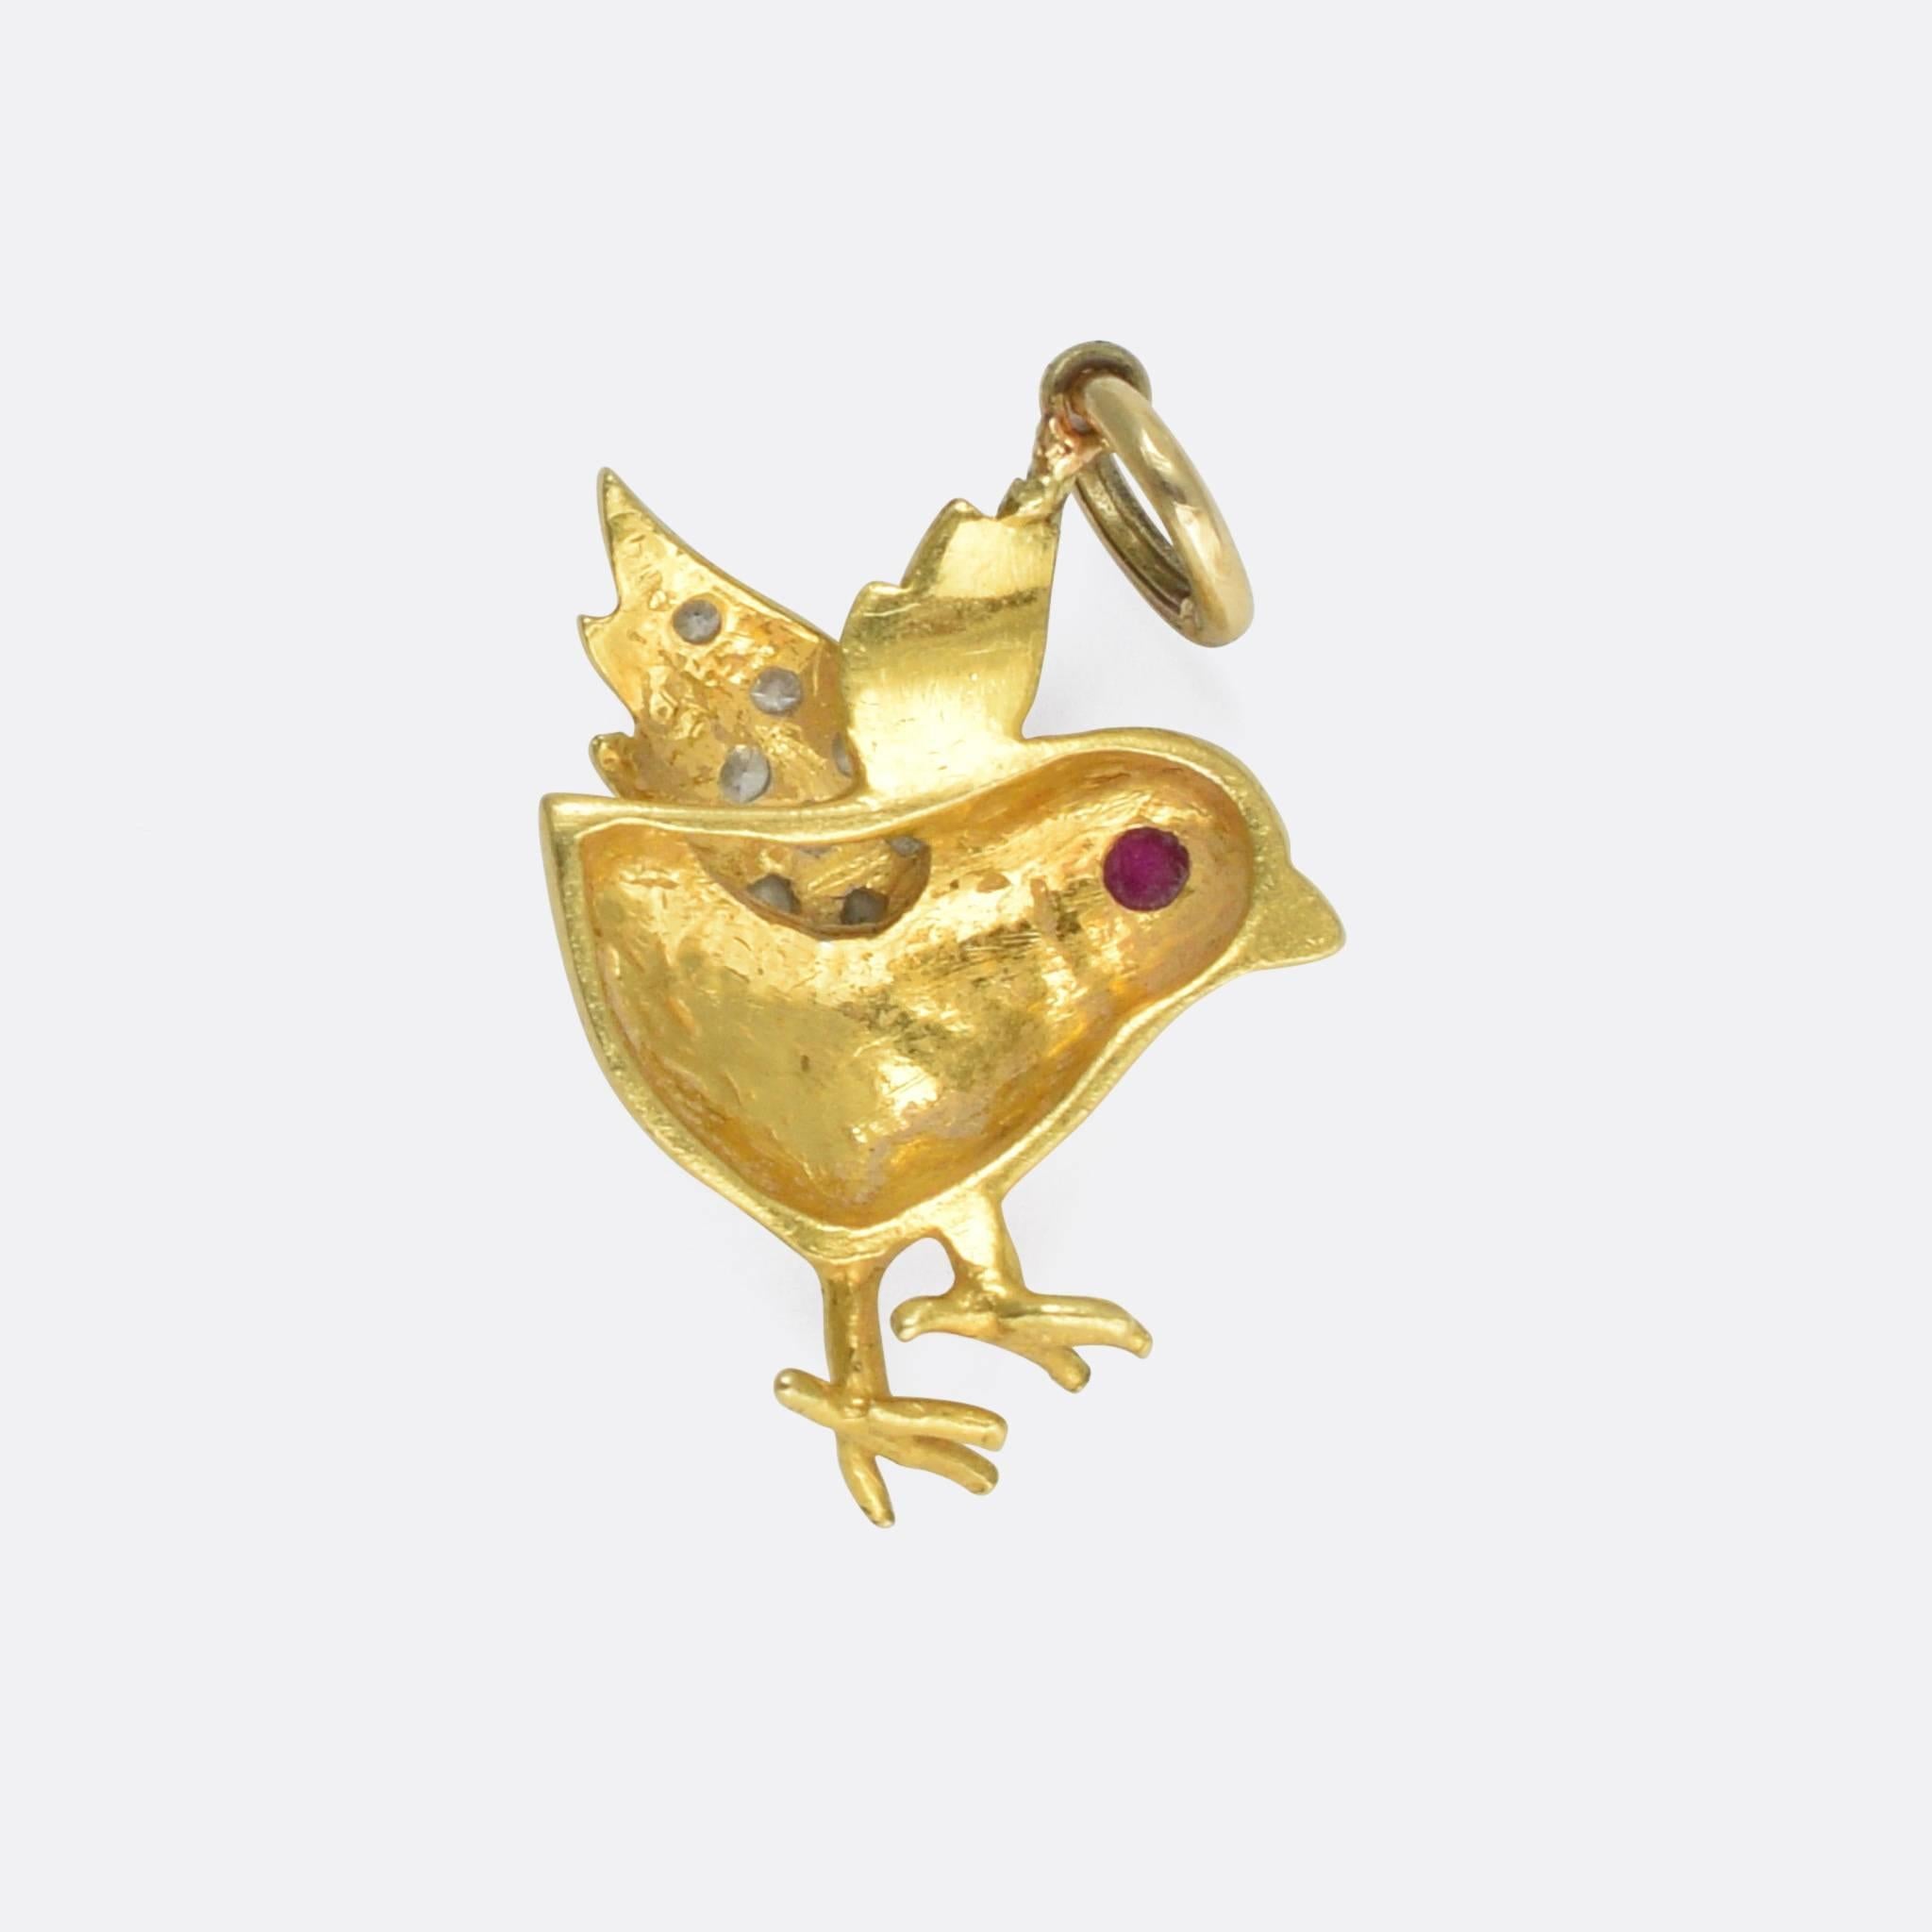 A sweet vintage pendant modelled as a stylized spring chicken. It's set with brilliant cut diamonds and a ruby eye, modelled in two-tone 18 karat gold. Such a cute piece, the perfect addition to your charm collection, or for wear as a single